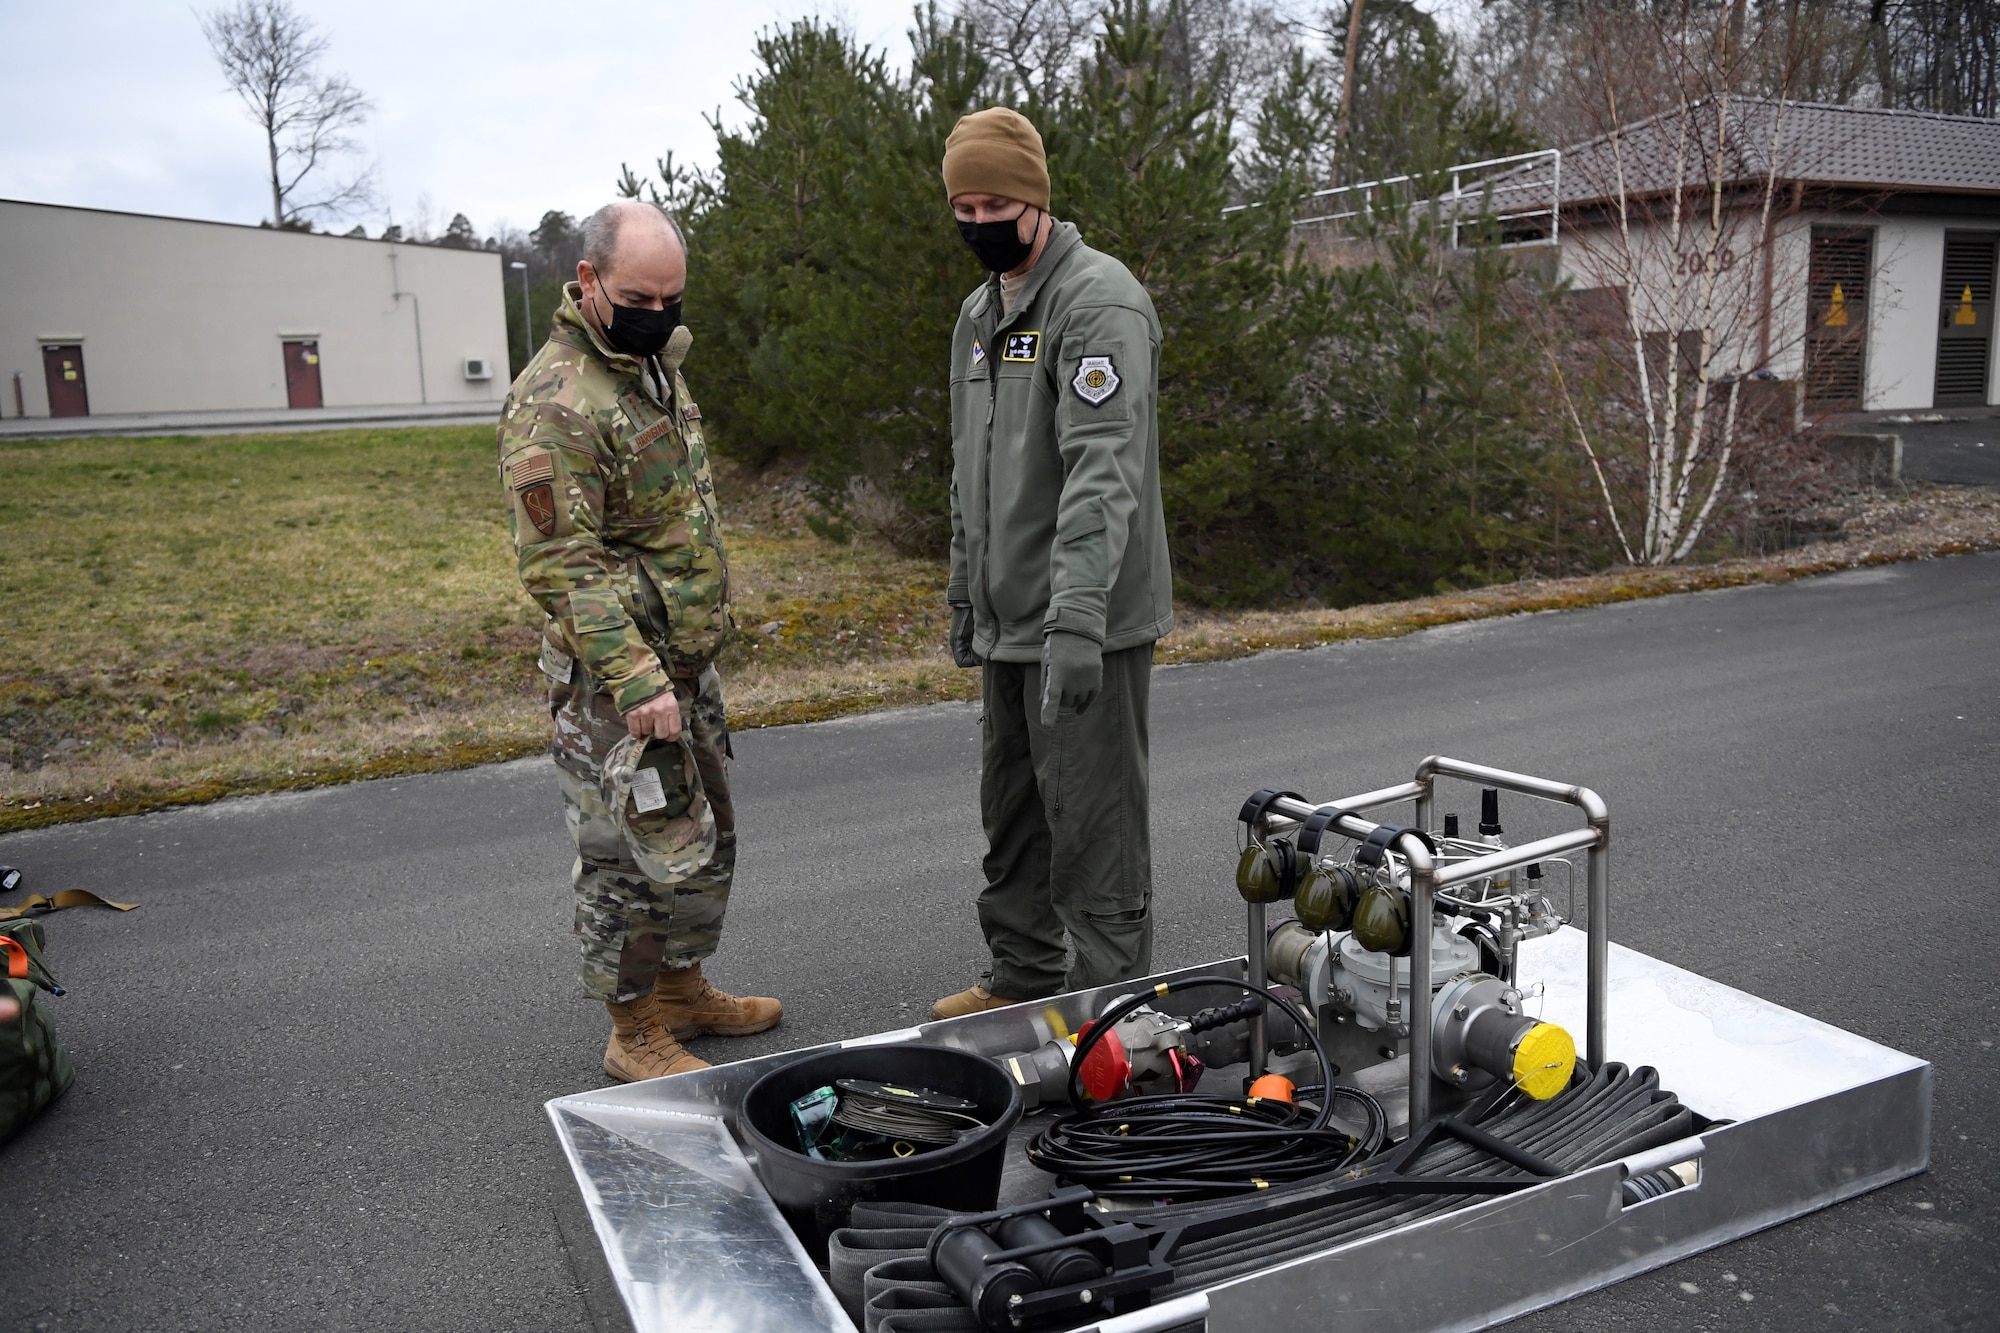 U.S. Air Force Col. David Epperson, 52nd Fighter Wing commander, shows the Viper Kit to U.S. Air Force Gen. Jeffery Harrigian, United States Air Forces in Europe and Air Forces Africa commander, during an Agile Combat Employment exercise at Ramstein Air Base, Germany, March 22, 2021. The Viper Kit is a small self-contained, portable, hot-pit-capable servicing platform that allows fuels Airmen to hot and cold pit refuel aircraft in austere locations. (U.S. Air Force photo by Tech. Sgt. Warren D. Spearman Jr.)